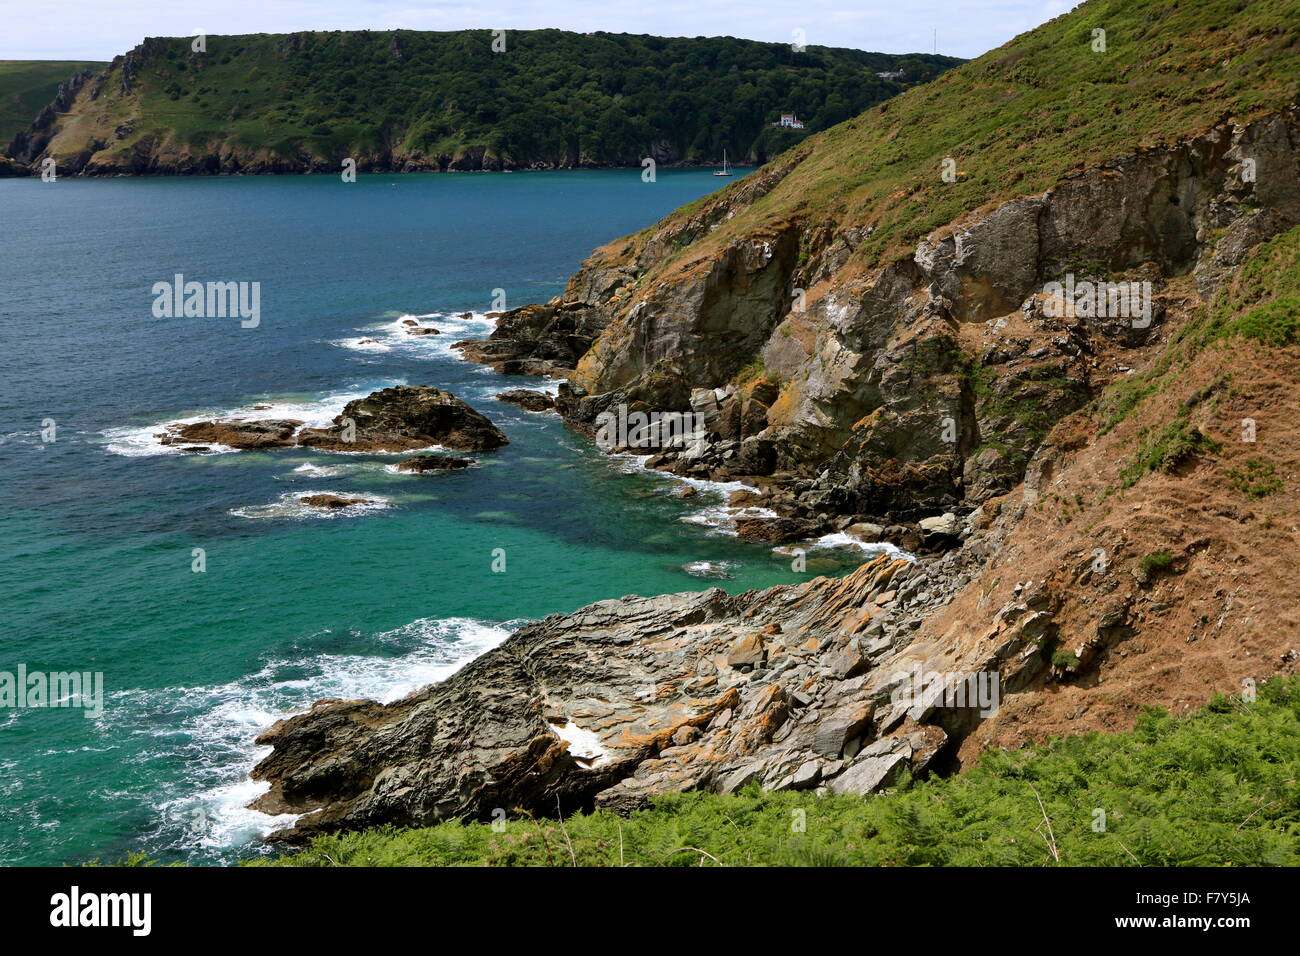 Looking towards the entrance of the Salcombe Estuary from the South West Coast Path in the South Hams, South Devon. Stock Photo